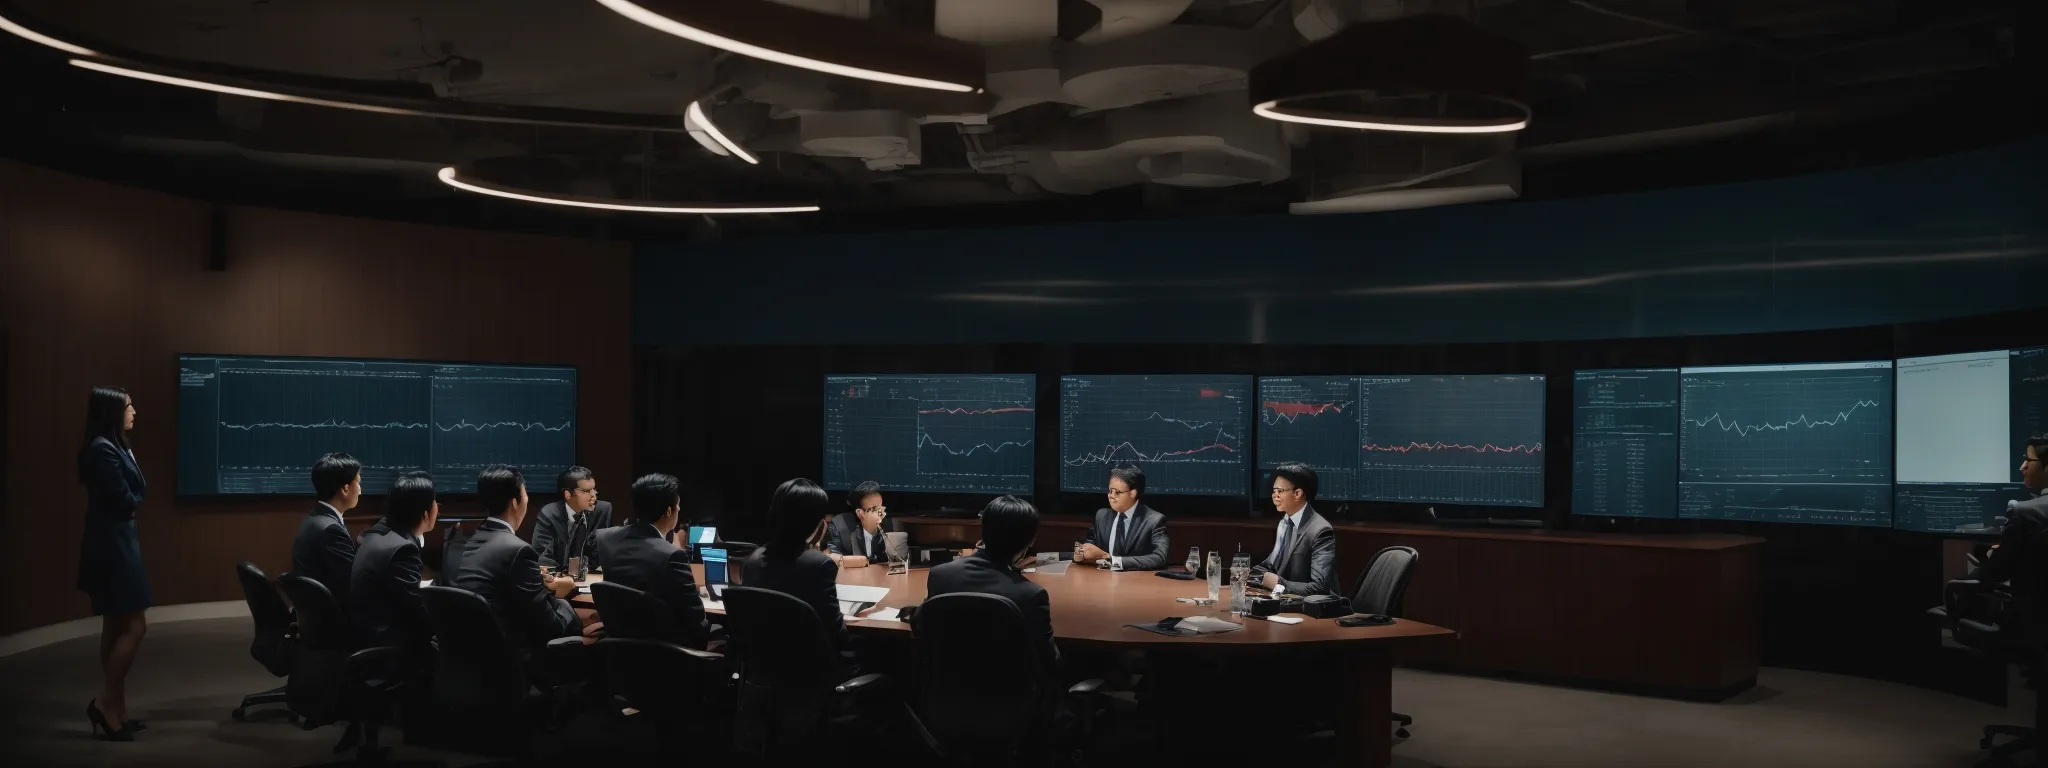 a board room with a digital marketing team analyzing charts and data on a large screen.